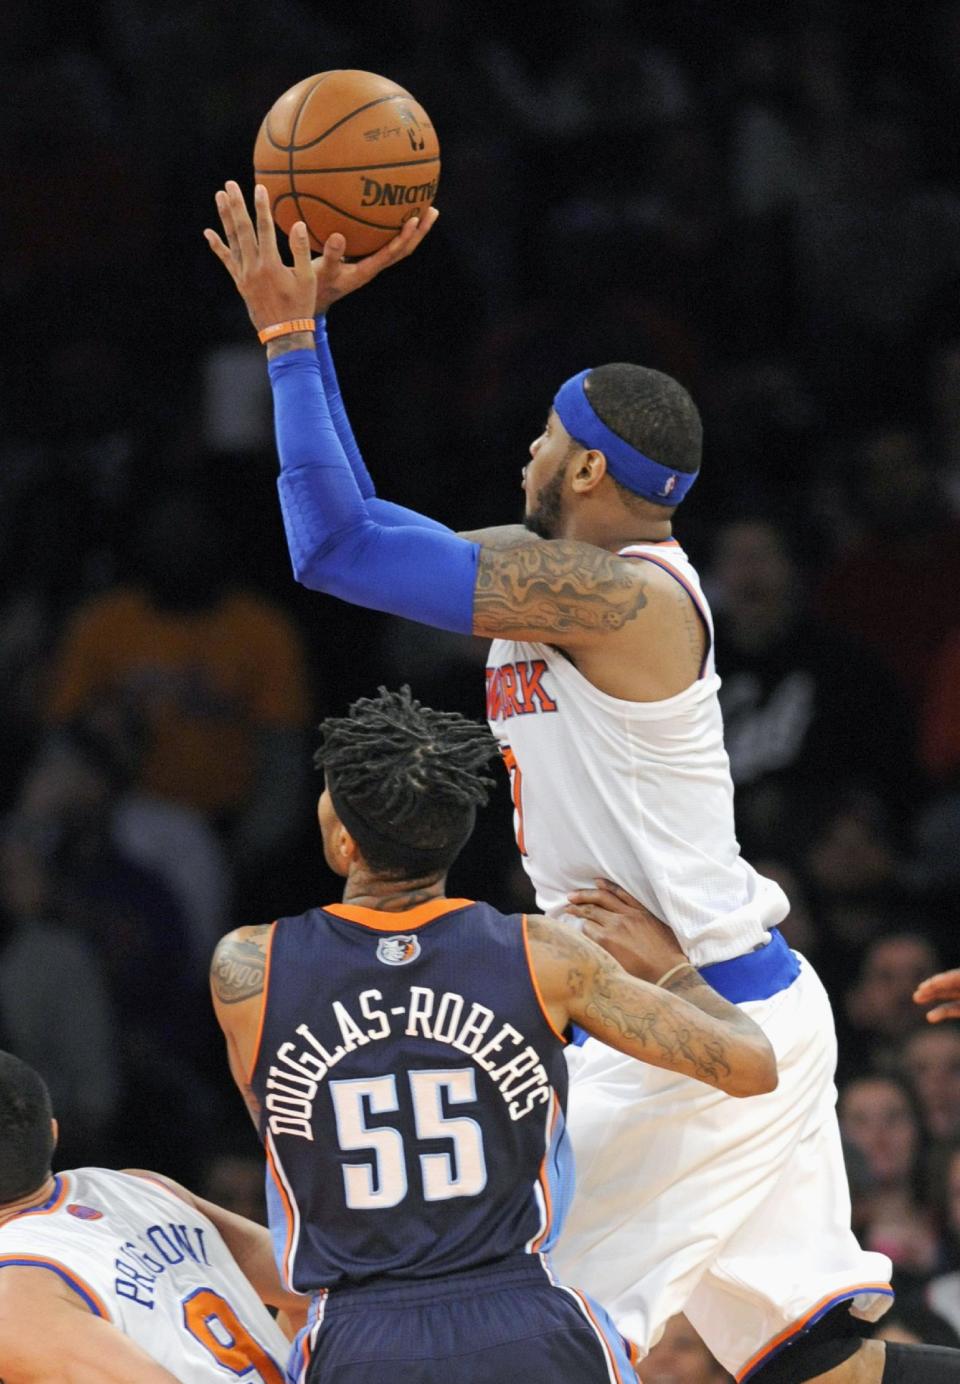 New York Knicks' Carmelo Anthony, right, puts up a shot as he gets by Charlotte Bobcats' Chris Douglas-Roberts (55) during the fourth quarter of an NBA basketball game Friday, Jan. 24, 2014, at Madison Square Garden in New York. The shot gave Anthony 62 points for a Garden record as the Knicks won 125-96. (AP Photo/Bill Kostroun)